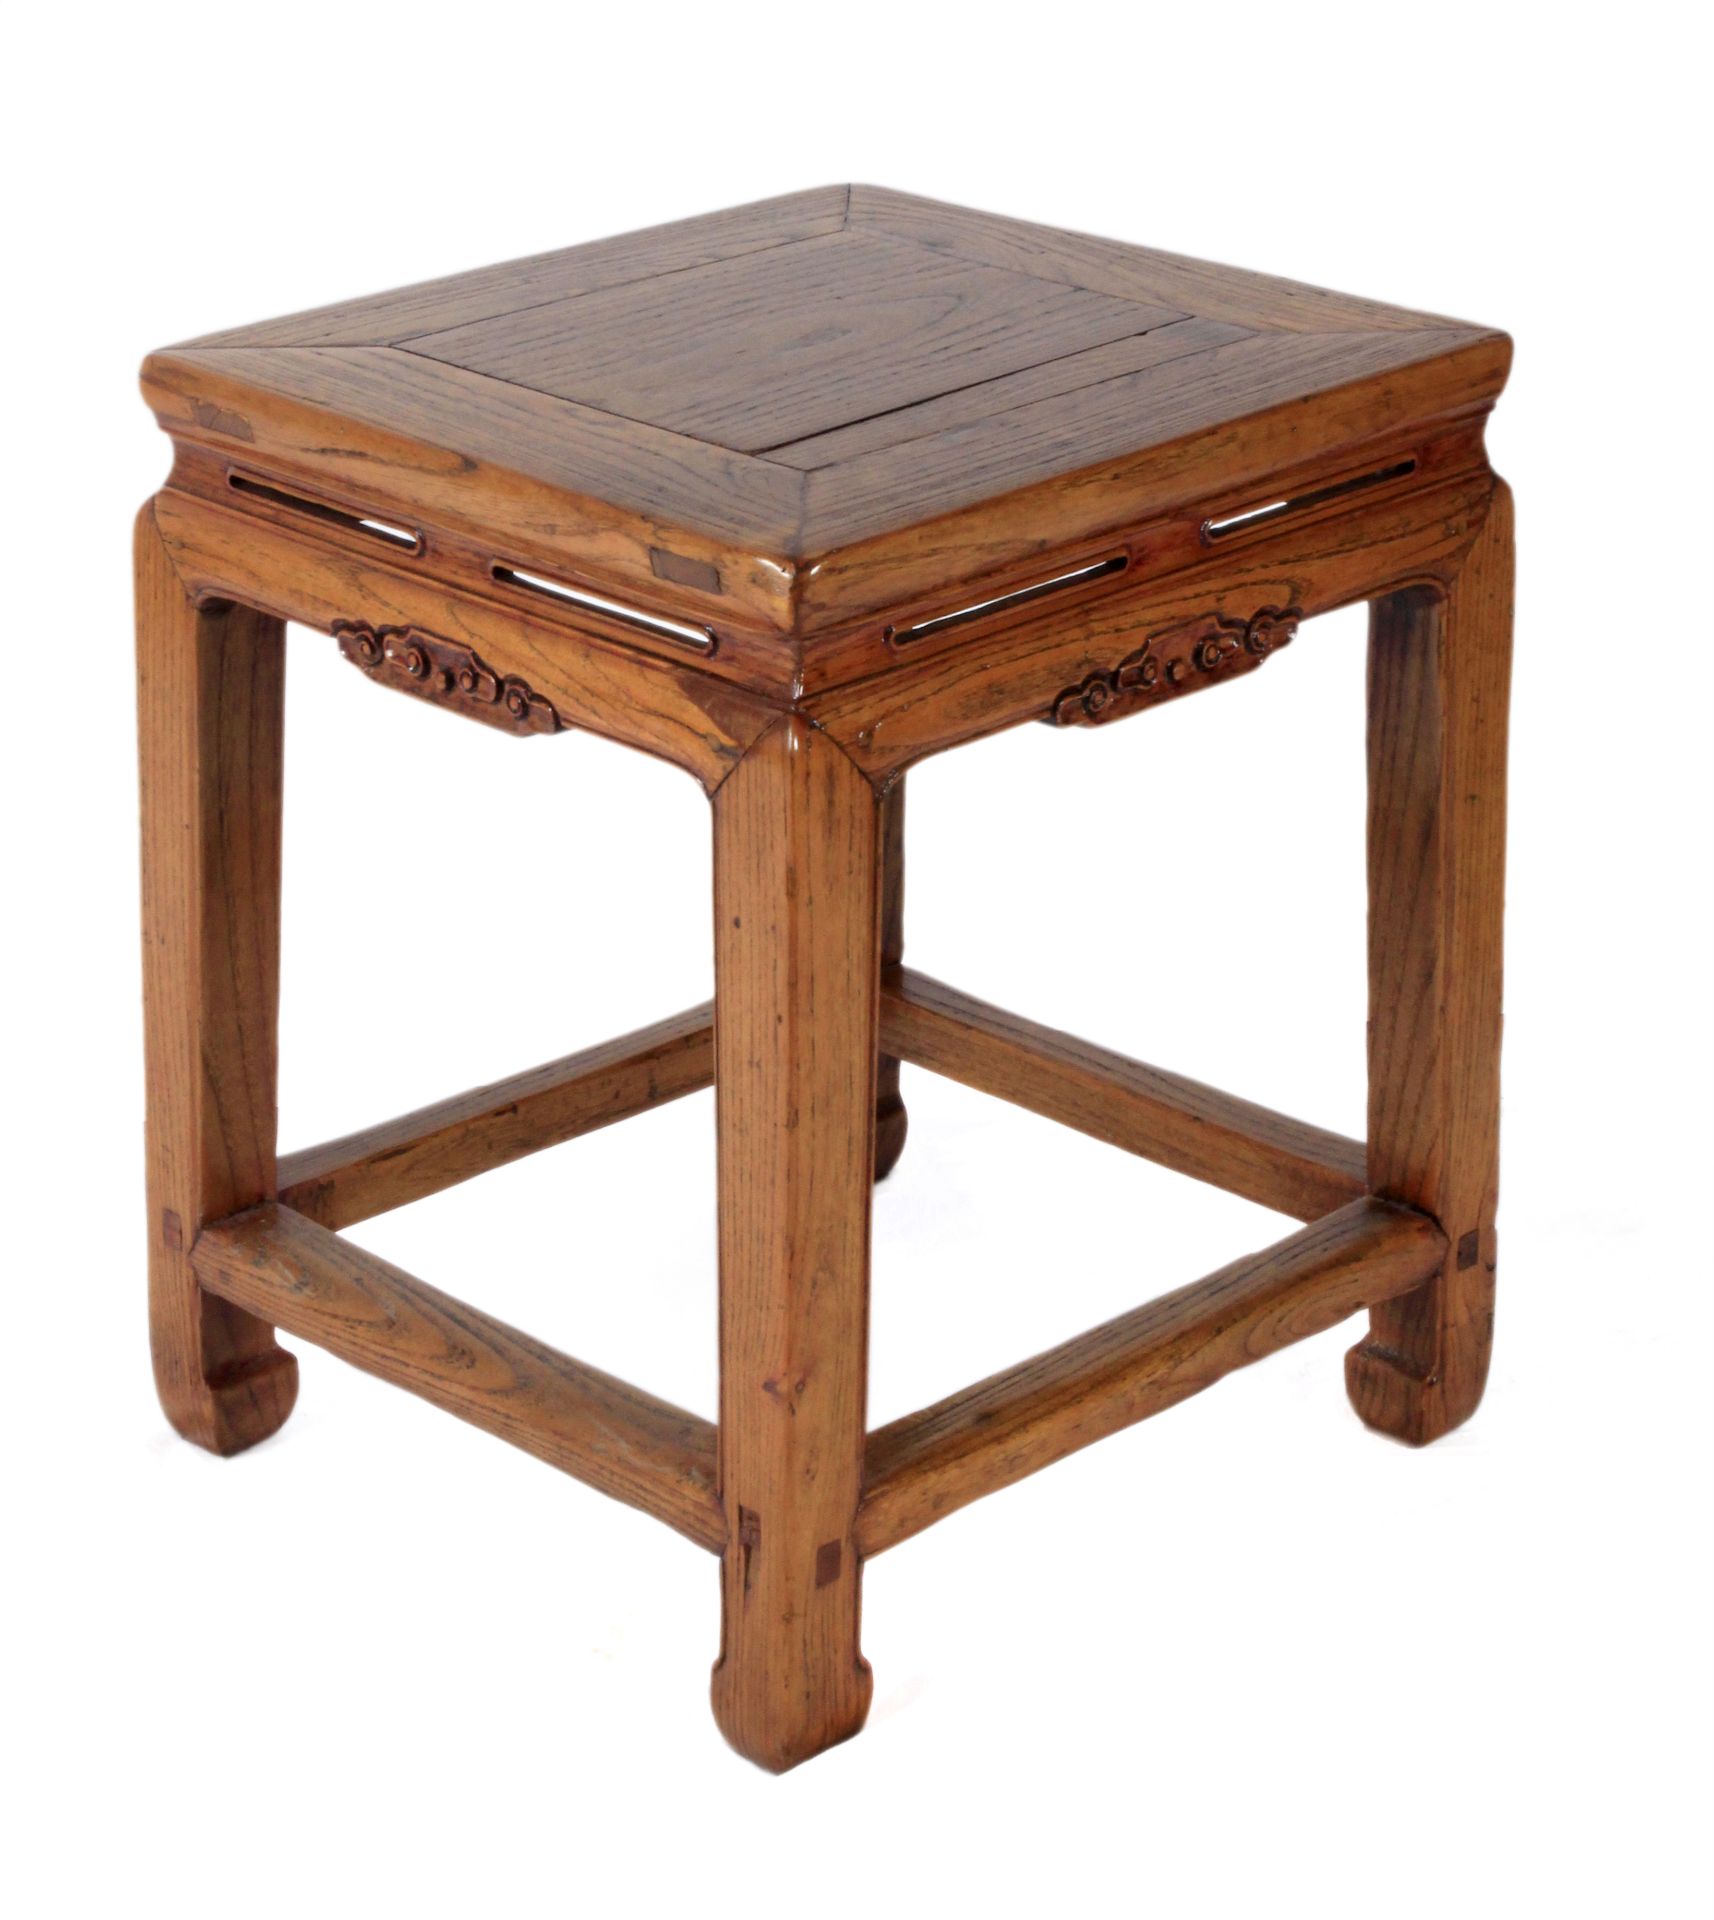 An 18th century Chinese oak side table